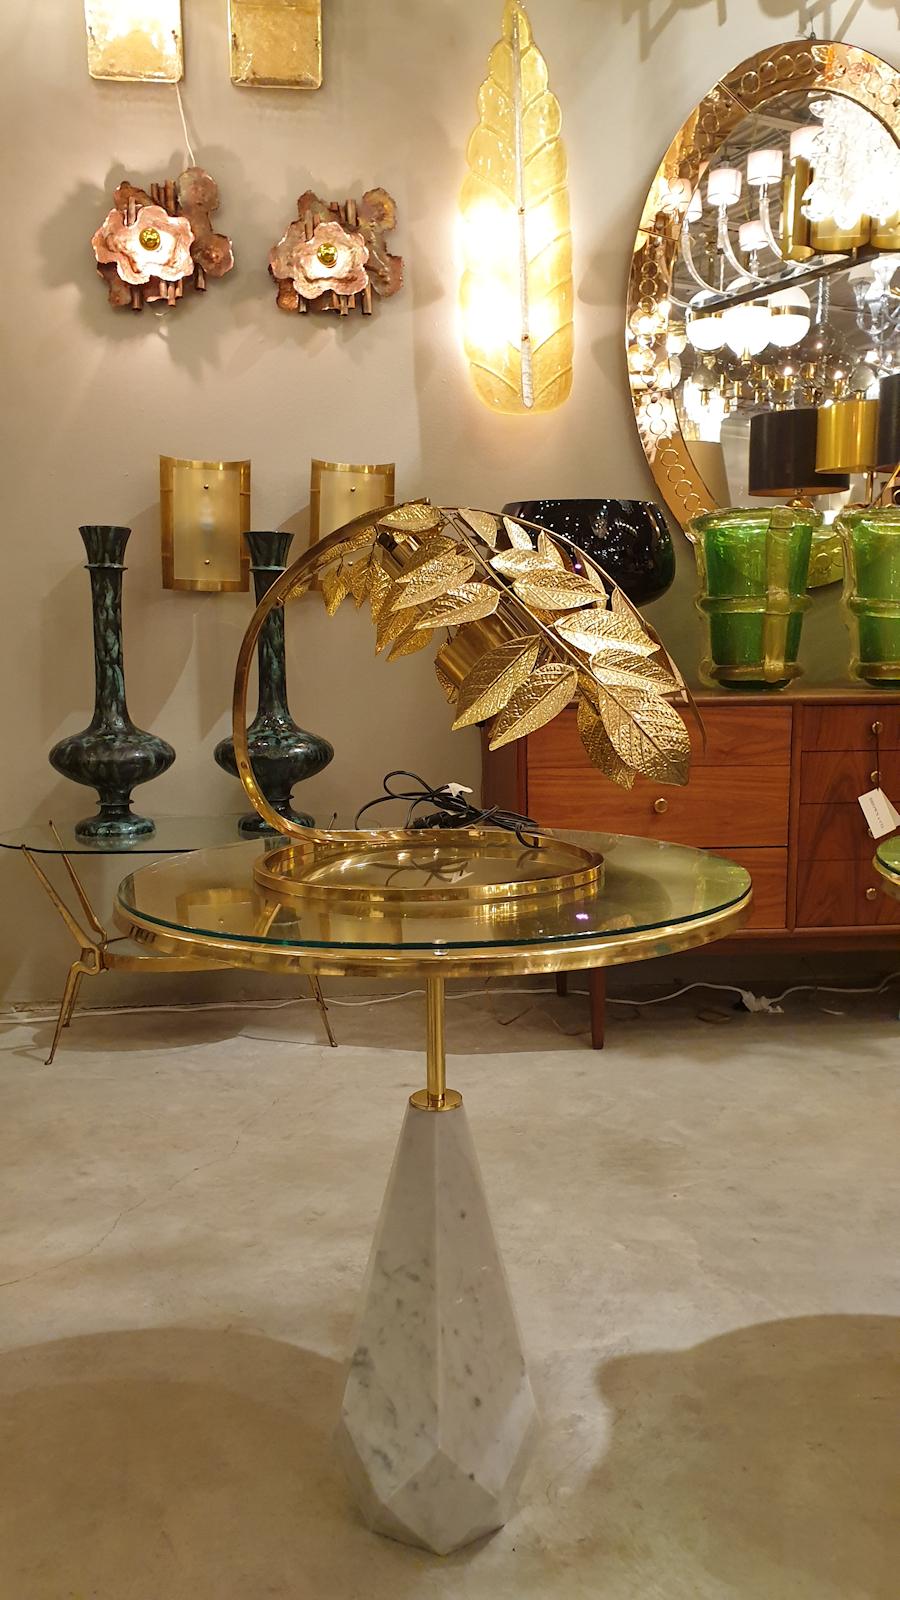 Mid-Century Modern hammered brass leaves table or desk lamp, by Tommaso Barbi, Italy, 1960s.
Delicate quality brass work, with full details. A modern touch classic lamp.
1 light, rewired for the US.
Creates a beautiful reflection through the